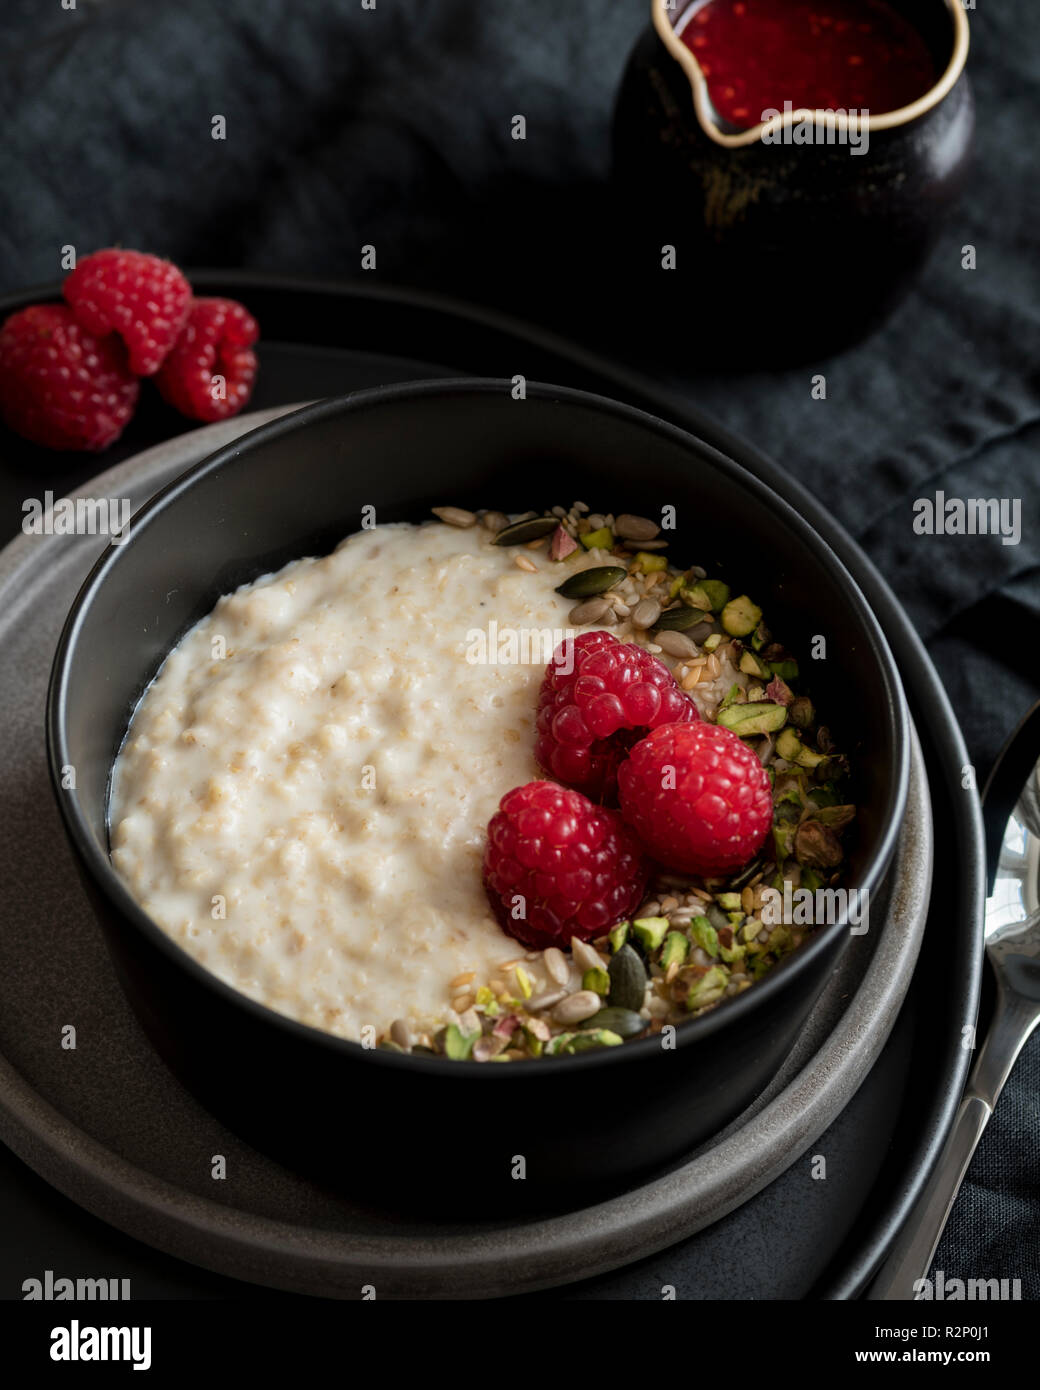 Porridge in dark bowl with nuts and soft fruit and fruit sauce Stock Photo